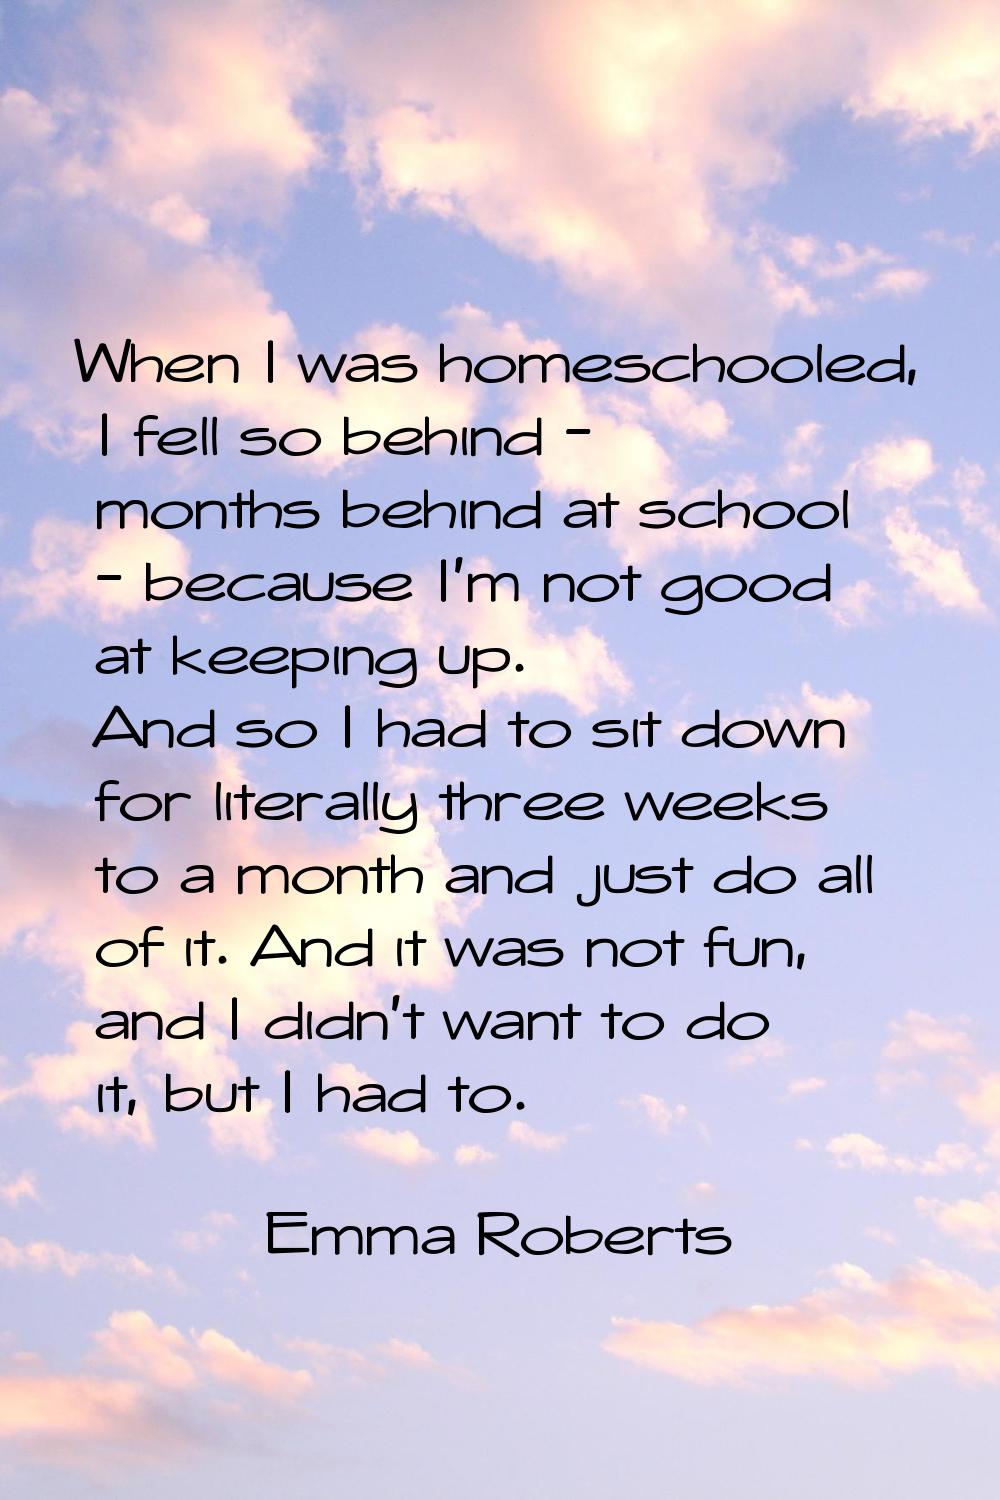 When I was homeschooled, I fell so behind - months behind at school - because I'm not good at keepi